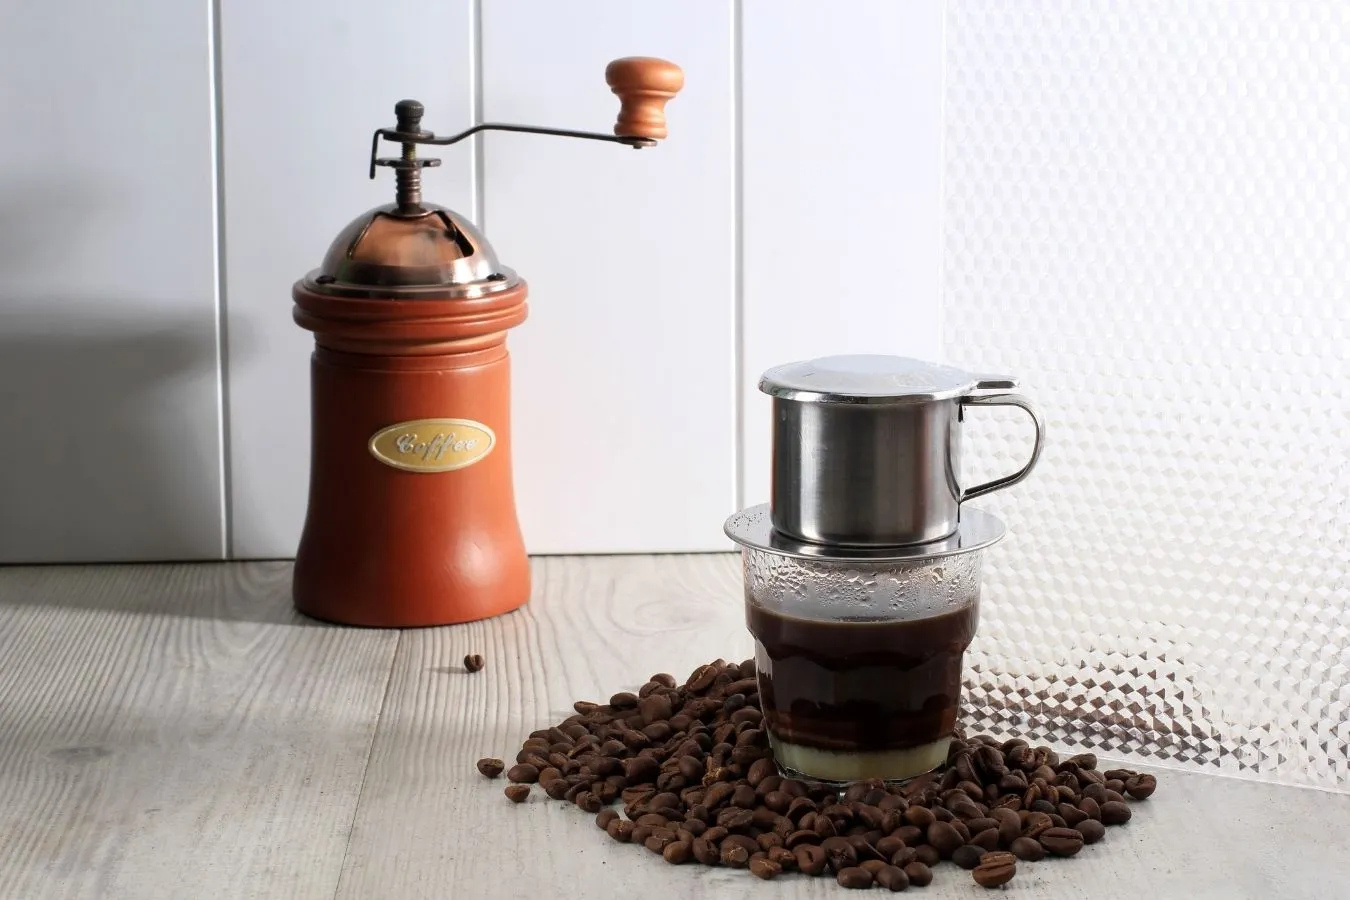 4 Common Ways To Make Coffee At Home